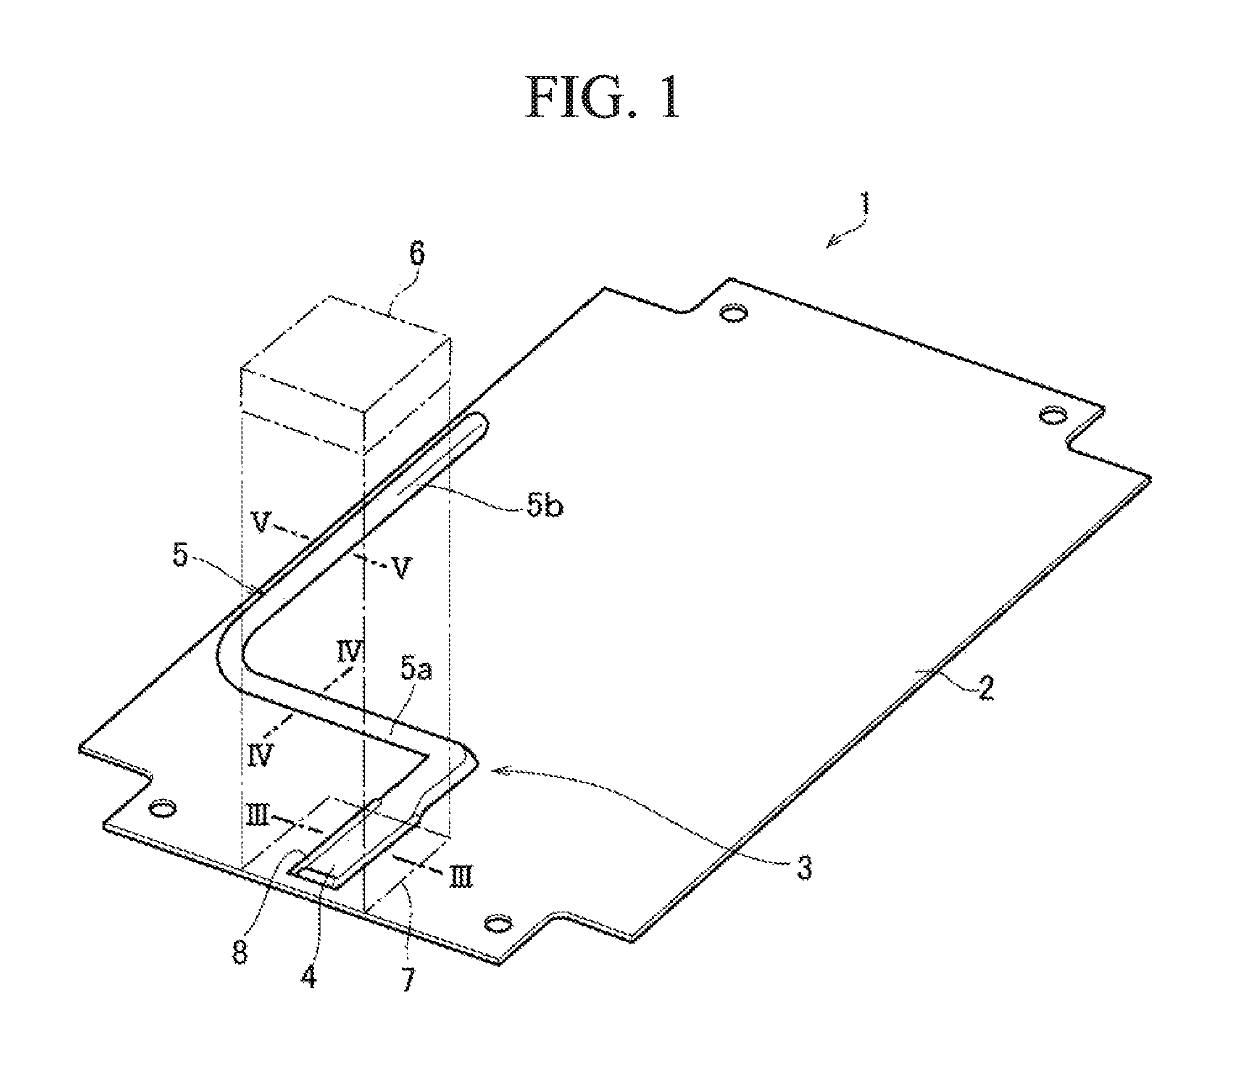 Heat spreading module for portable electronic device